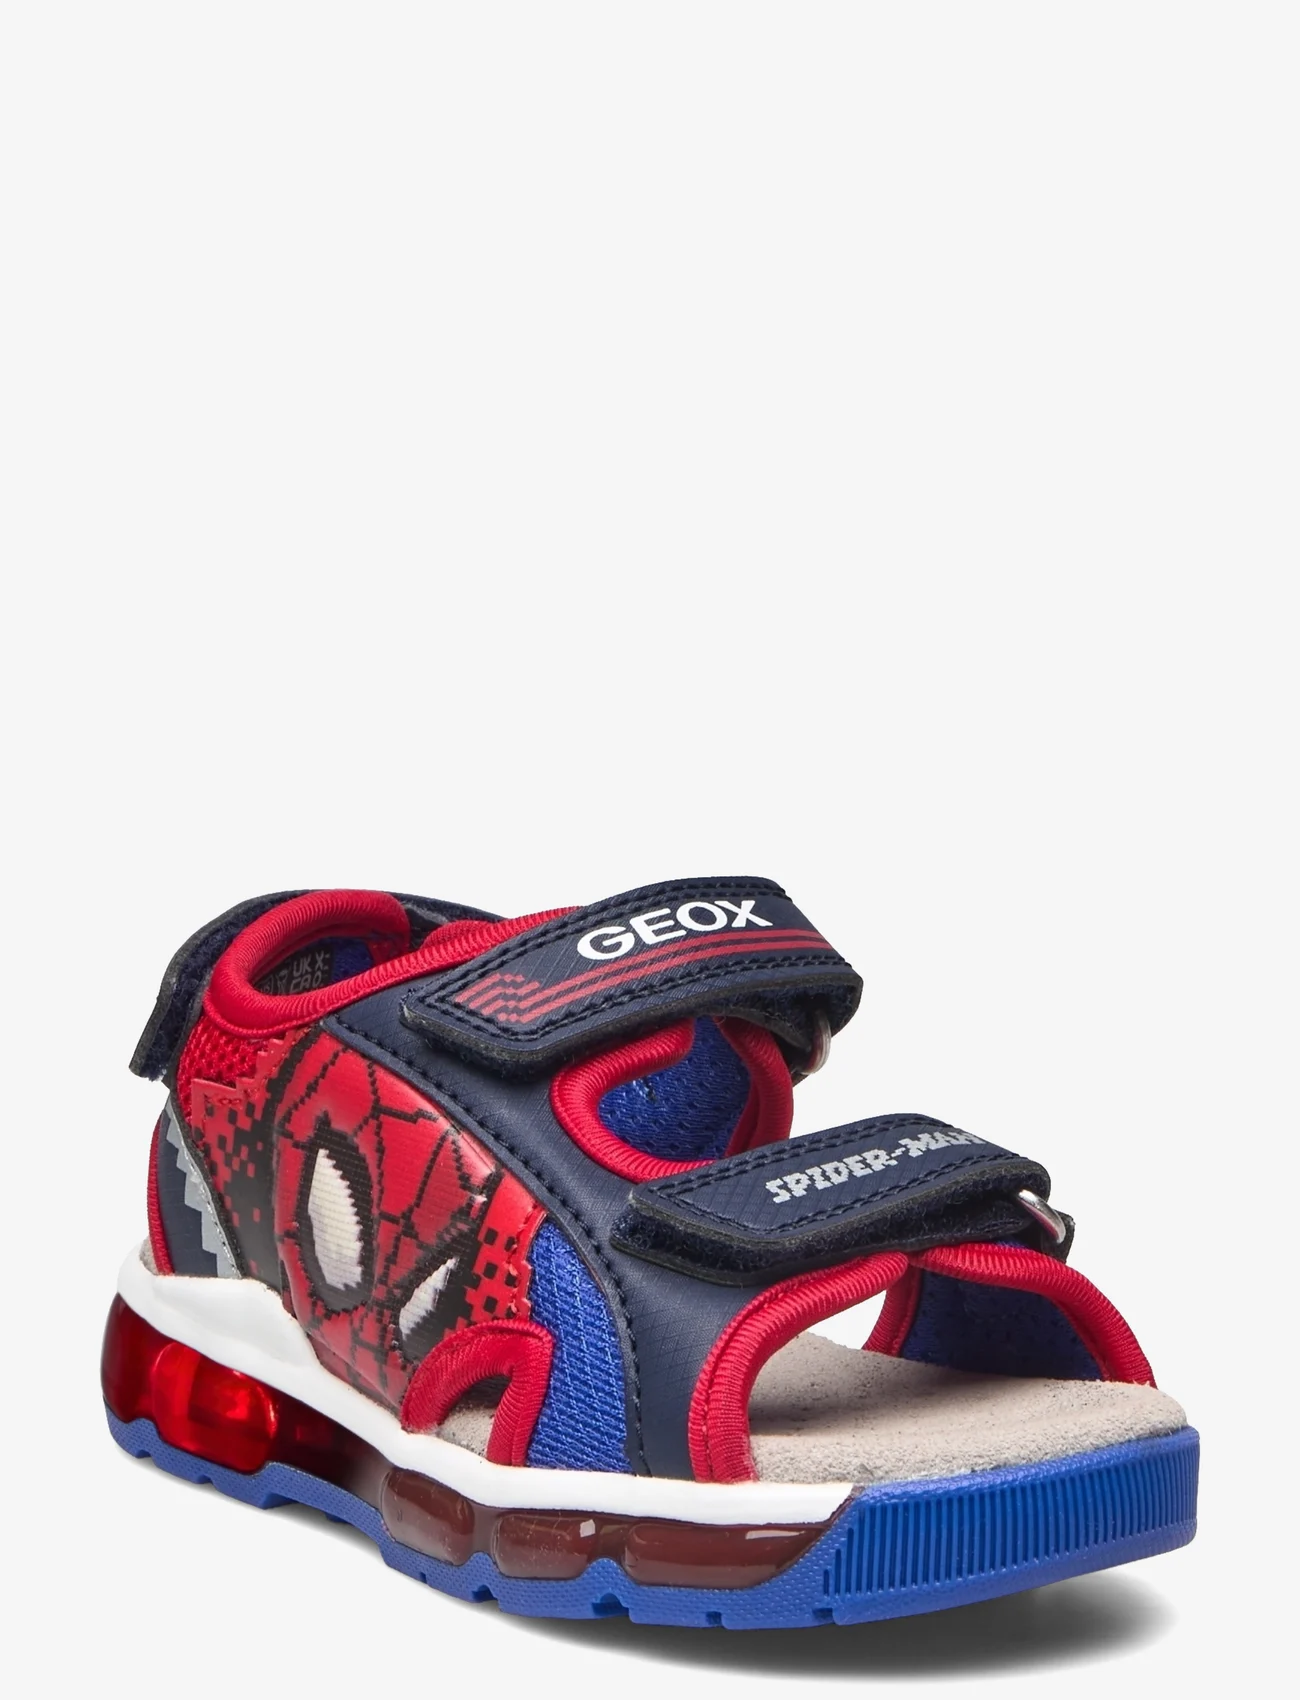 GEOX - J SANDAL ANDROID BOY - sommerschnäppchen - navy/red - 0